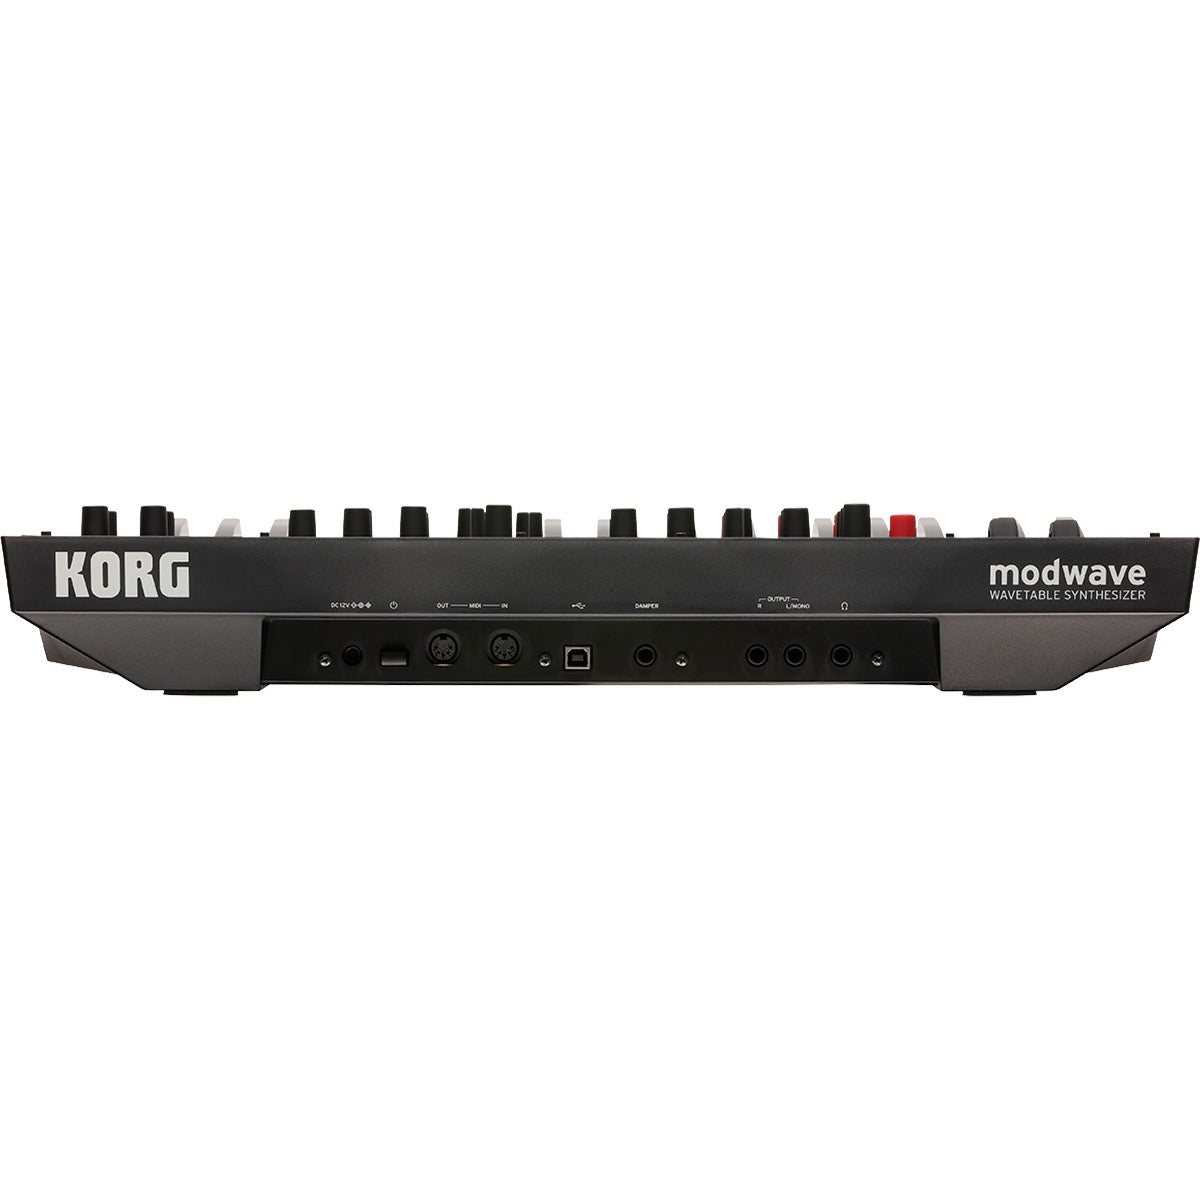 Rear view of Korg Modwave Wavetable Synthesizer